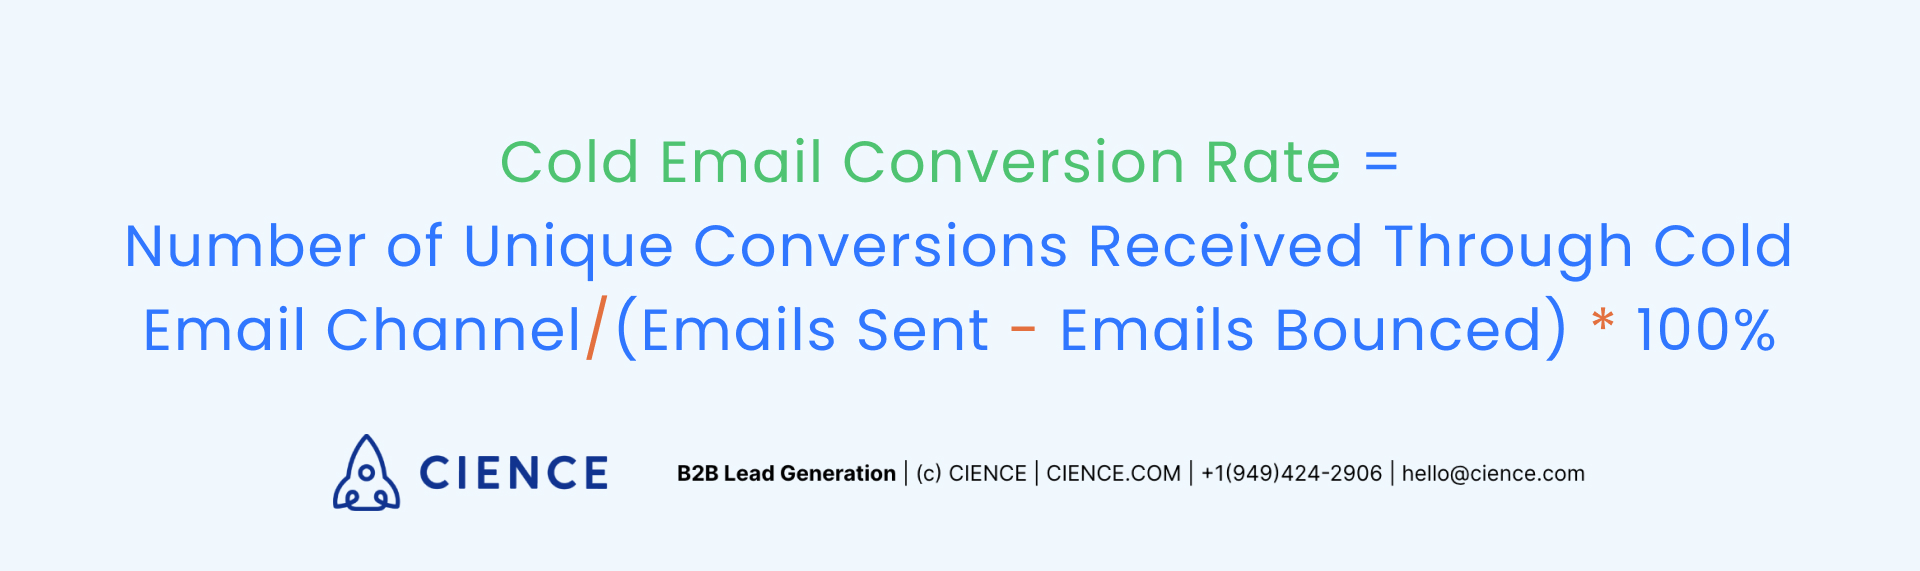 Cold Email Conversion Rate Formula